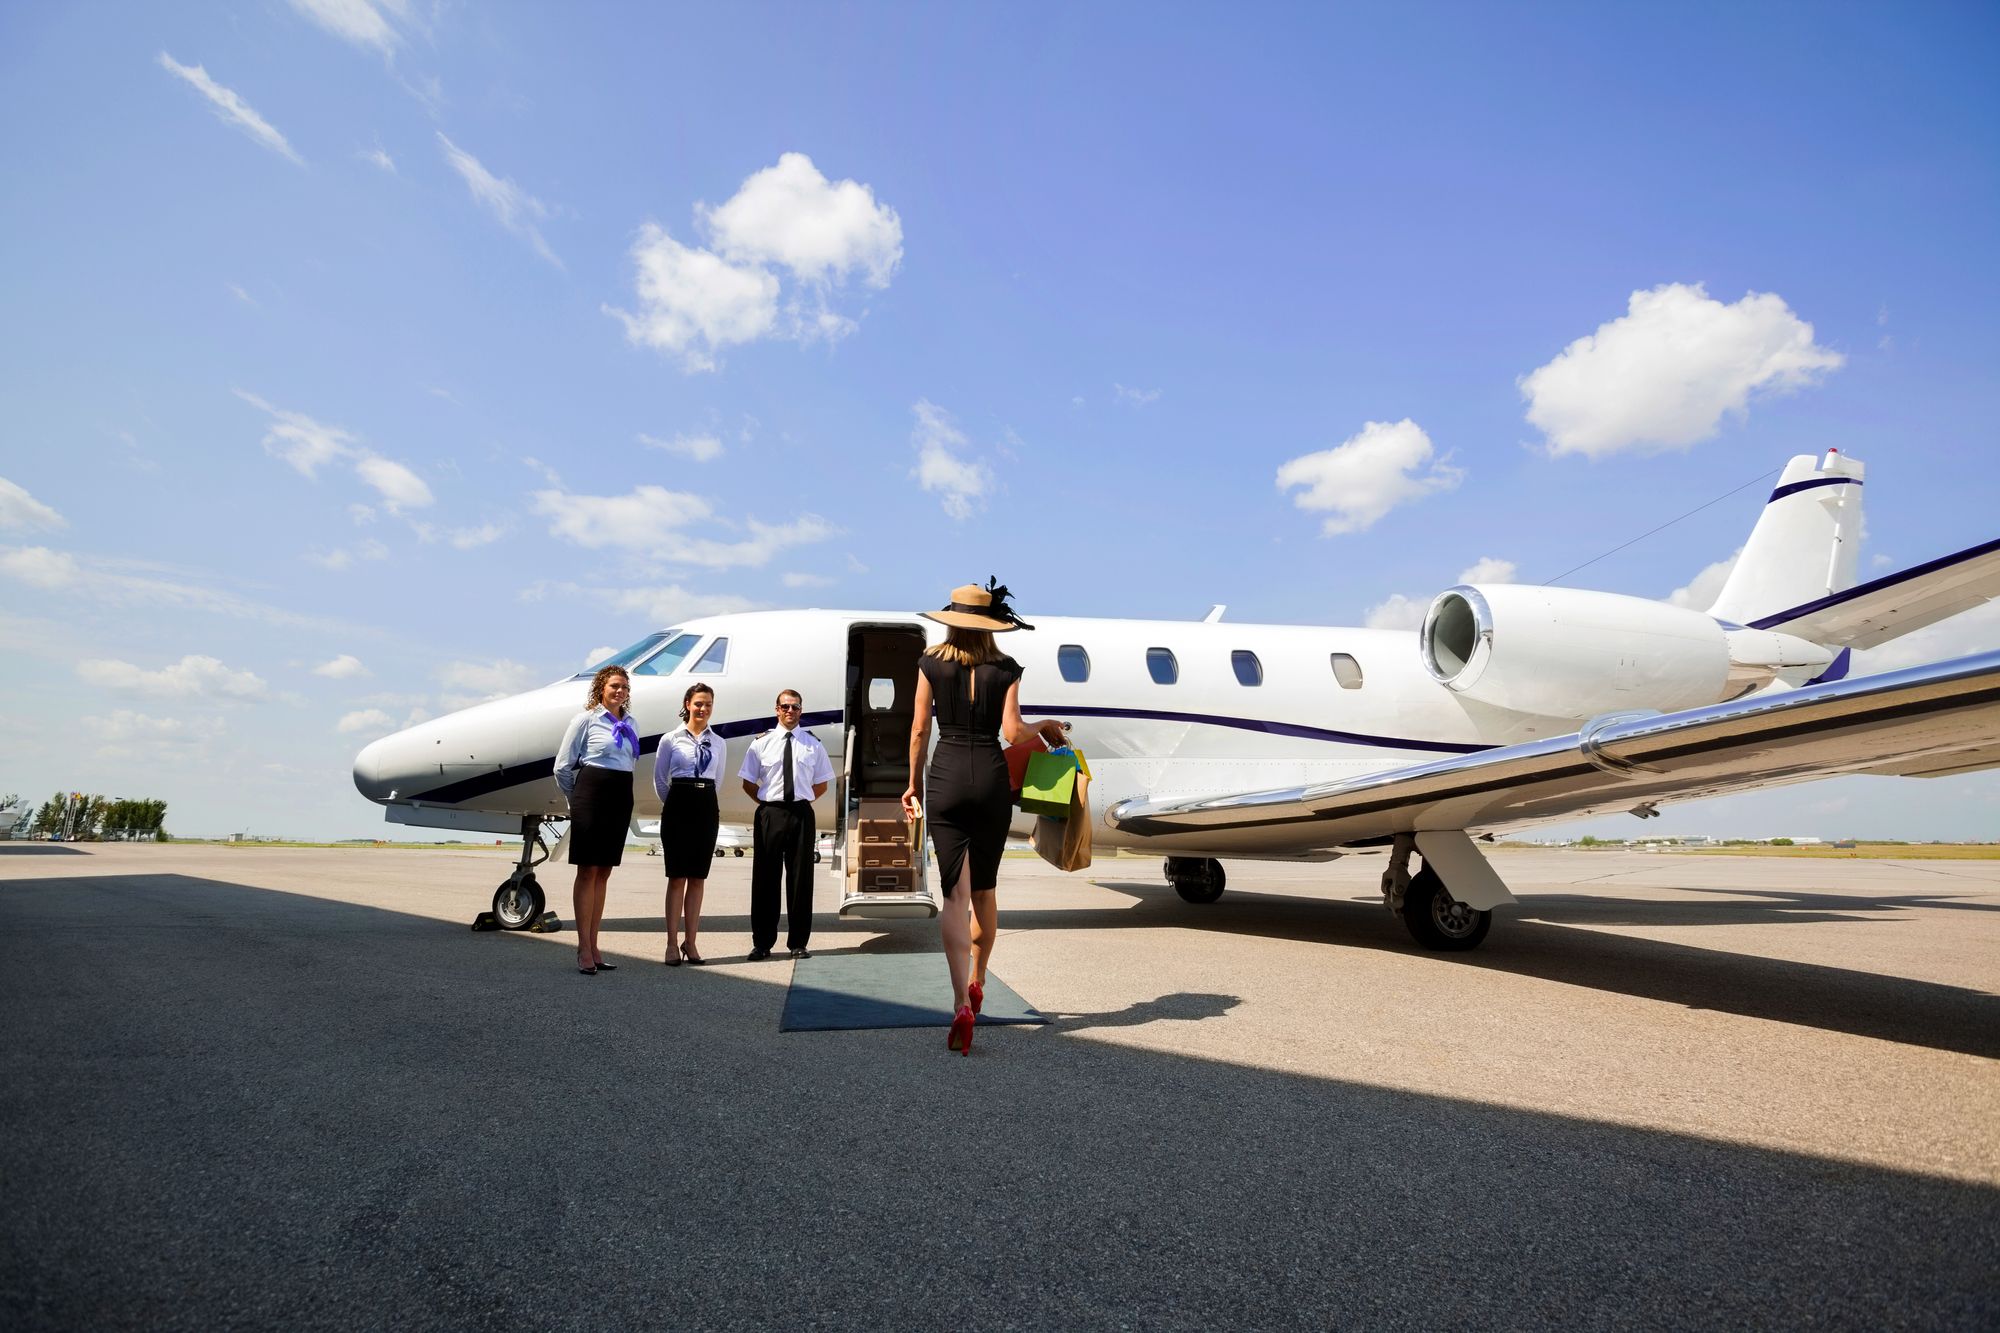 THE LUXURY OF FLYING PRIVATE